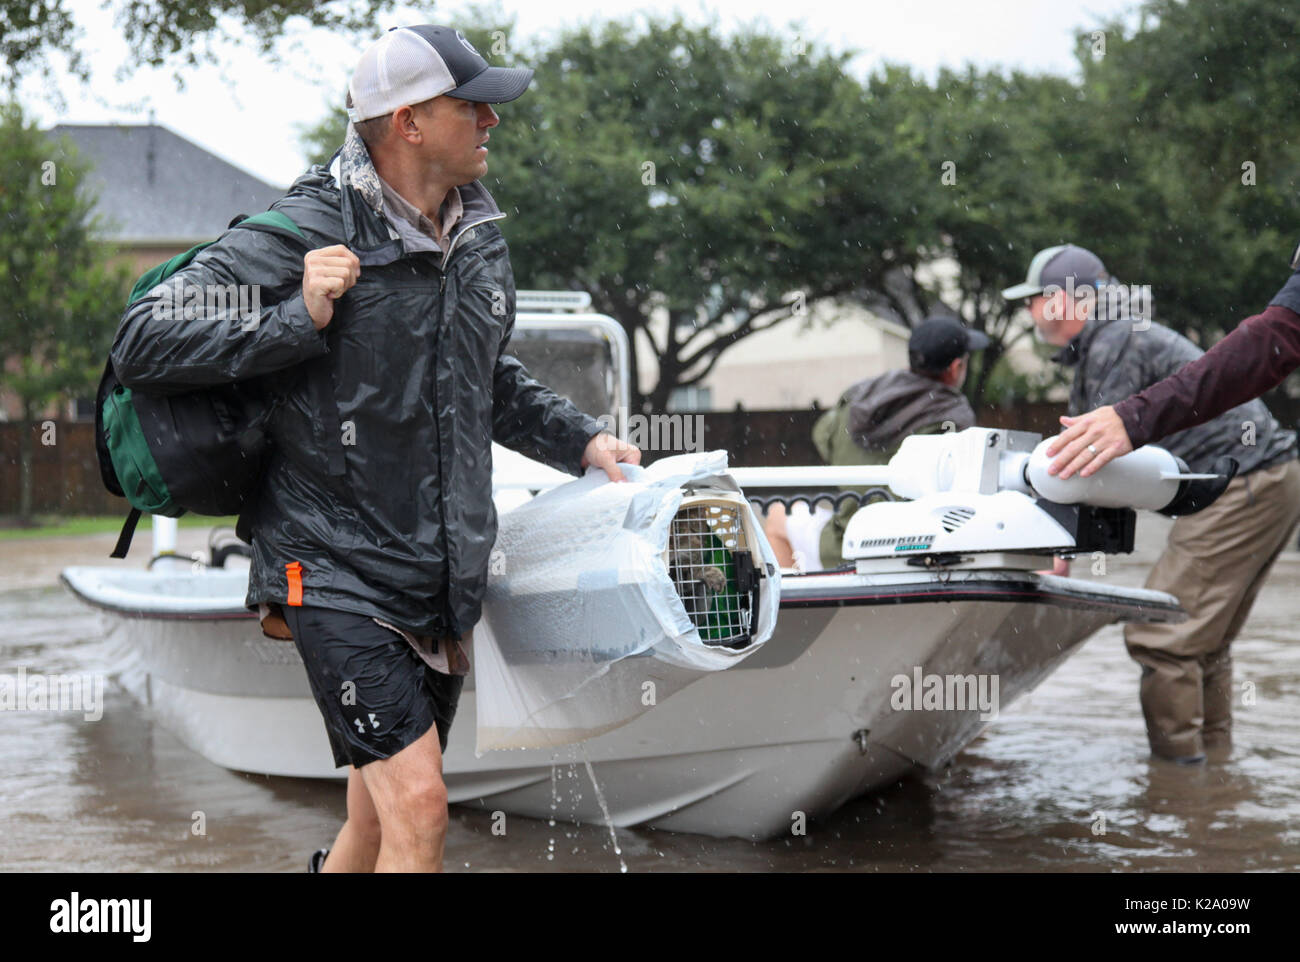 Houston, Texas, USA. 29th August, 2017. A volunteer worker helps carry a cat carrier and bags for residents who evacuated from Katy's Grand Lakes after Hurricane Harvey in Houston, TX. Credit: Cal Sport Media/Alamy Live News Stock Photo